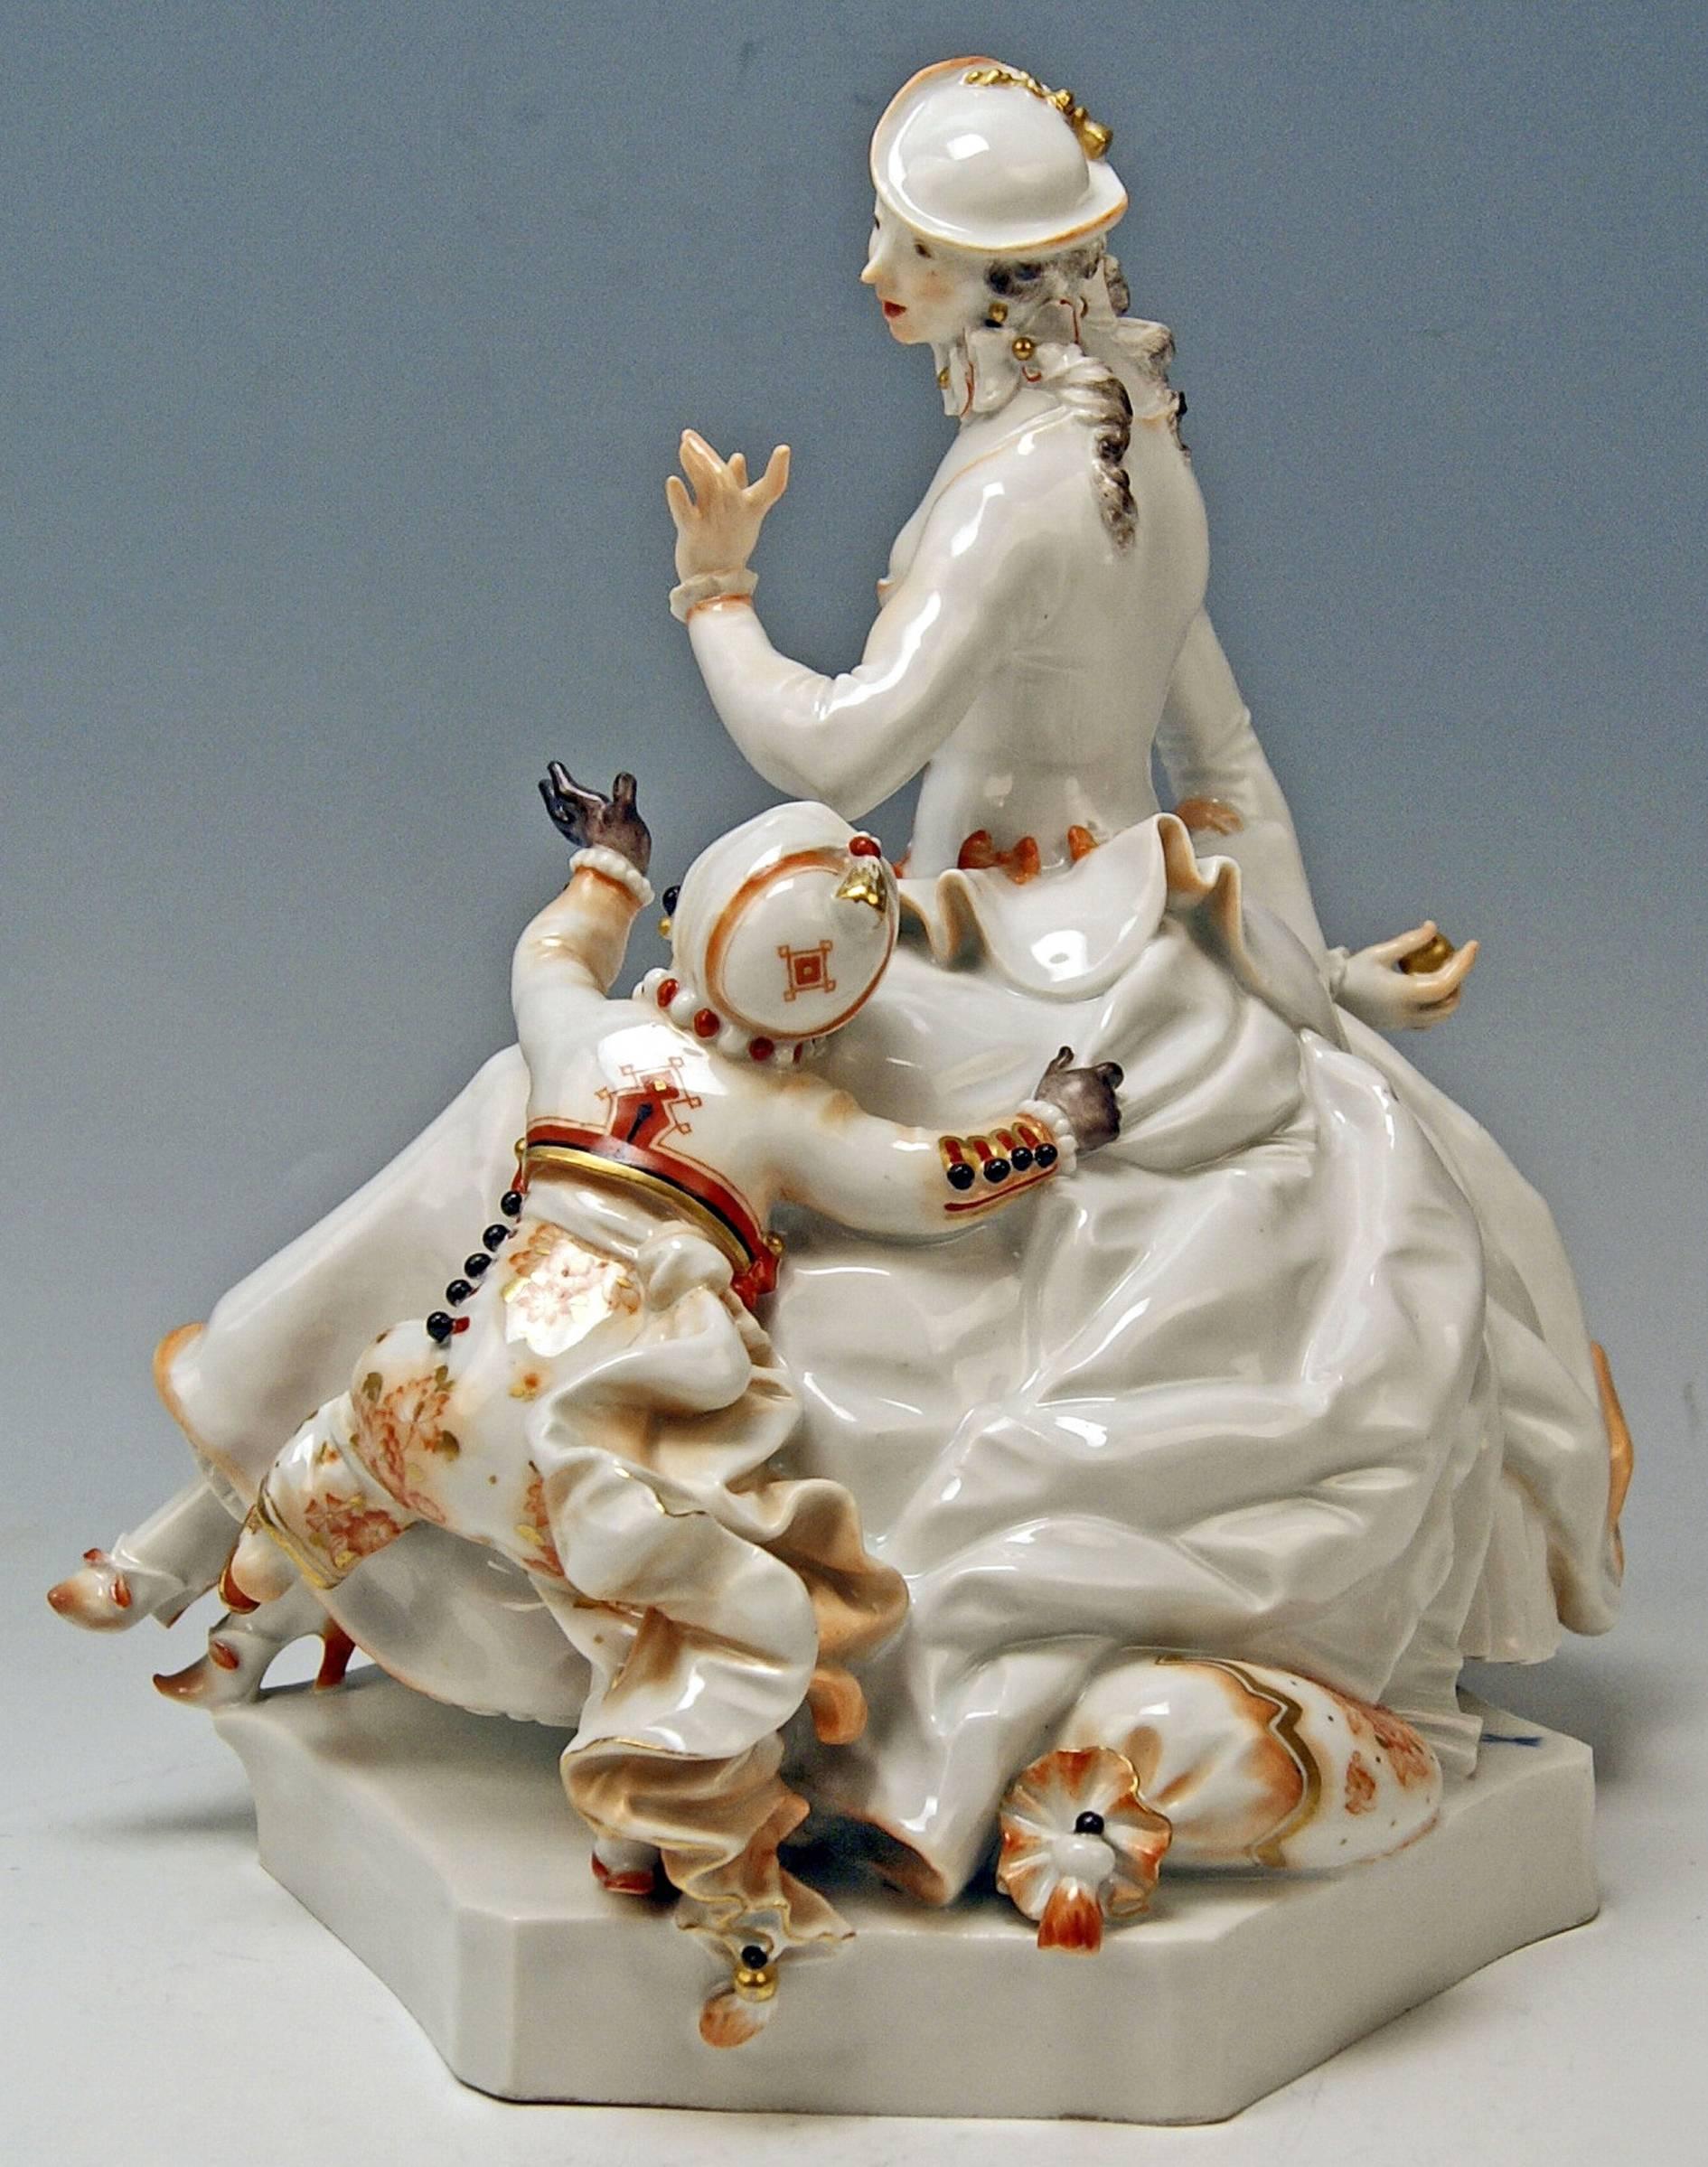 Art Deco Meissen Figurine Group Lady and Black Boy by Paul Scheurich made c.1920-21